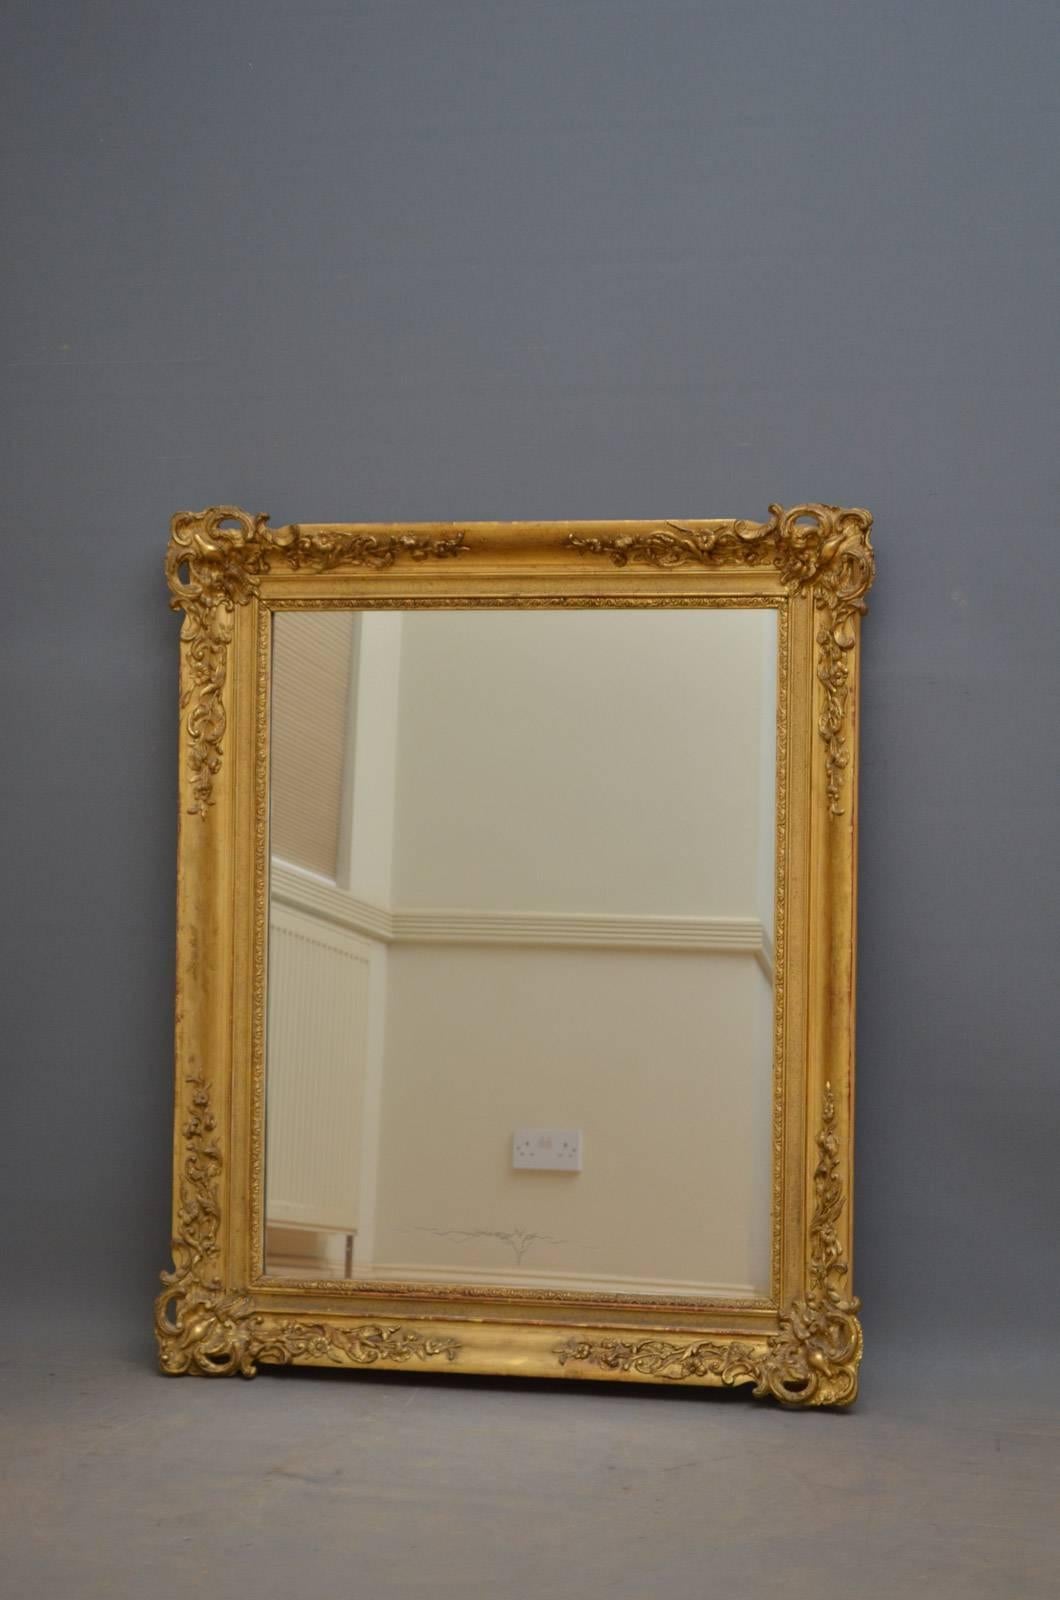 Sn4360, 19th century French mirror of versatile form could be positioned portrait or landscape, having original mirror plate with some foxing in beautifully carved and gilded frame. This antique gilt mirror is in wonderful original condition